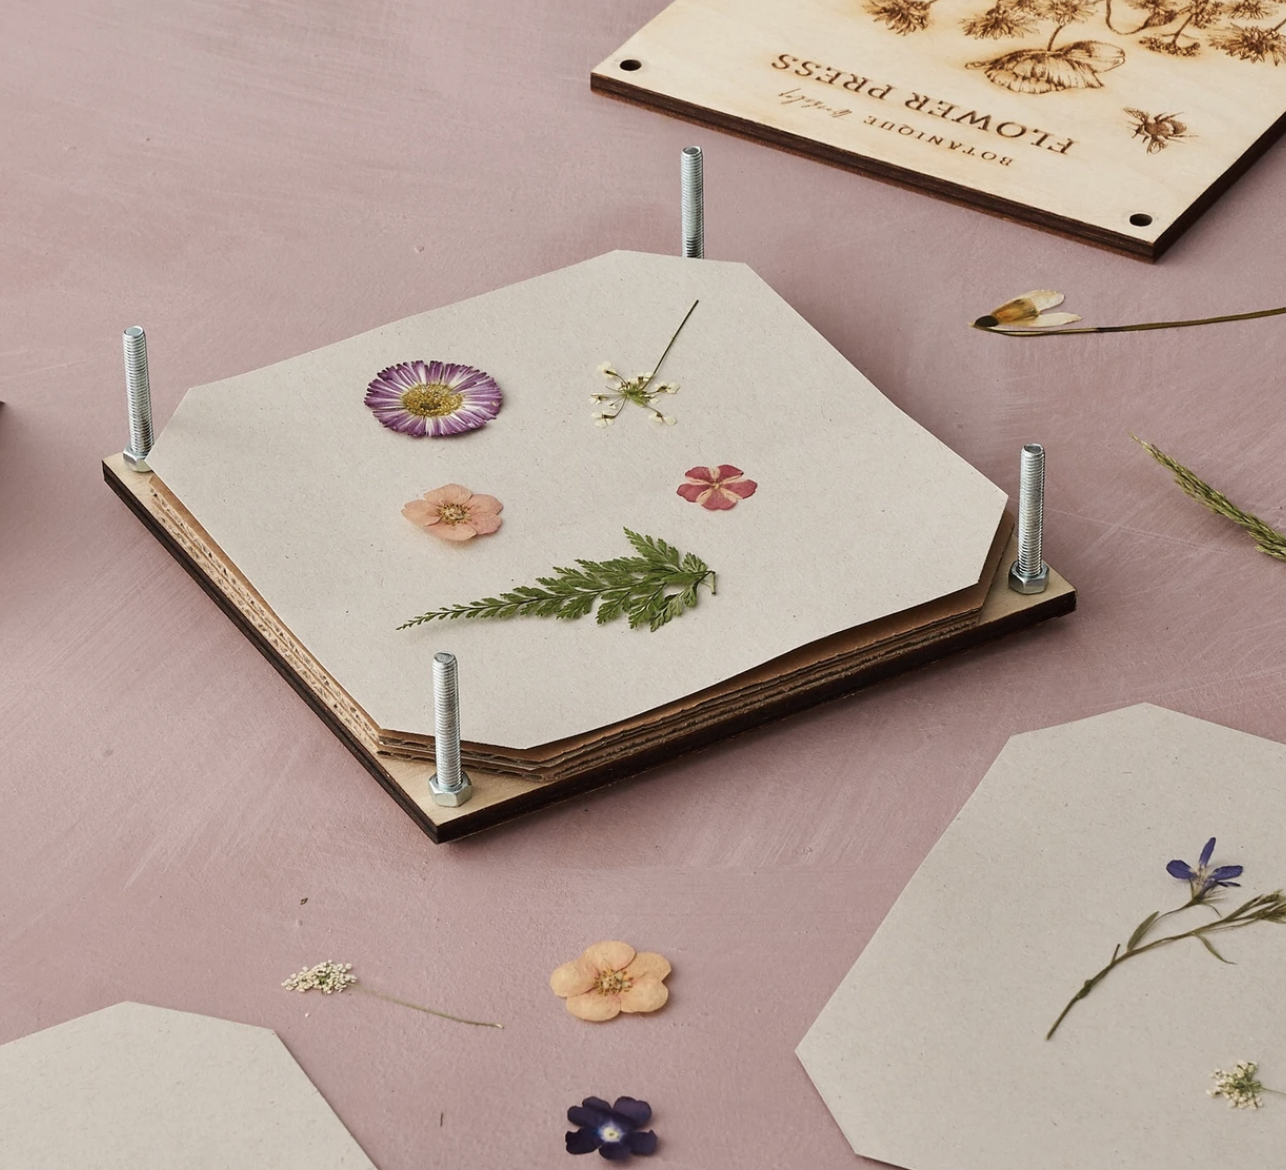 The Every Space wooden Flower Press for pressing fresh flowers to create dried flower decorations by Botanique Workshop